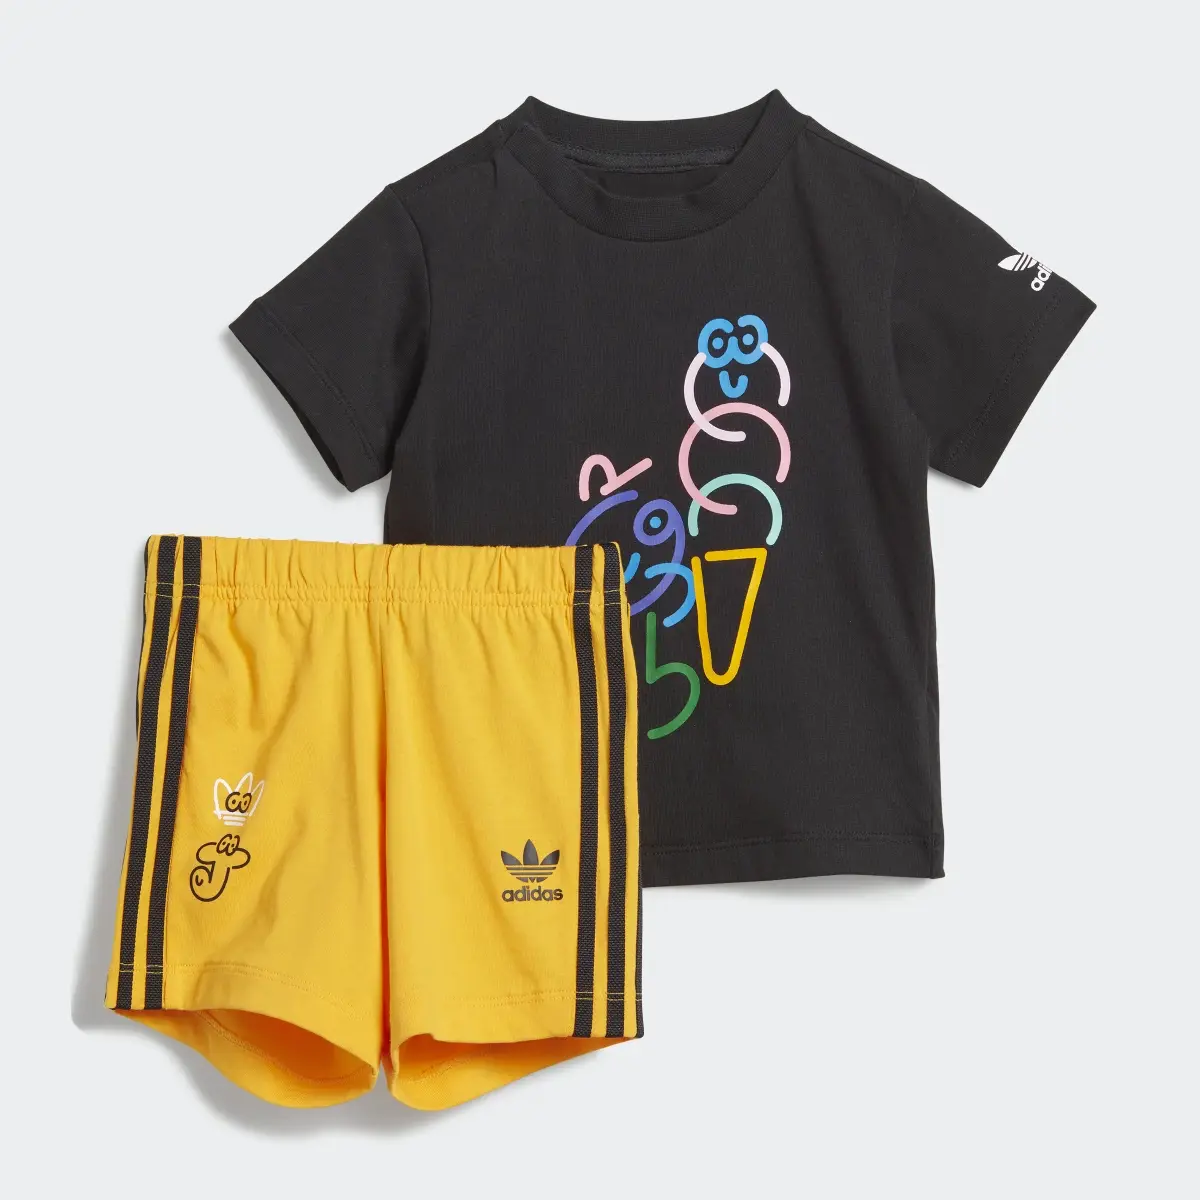 Adidas Completo adidas x James Jarvis Shorts and Tee. 2